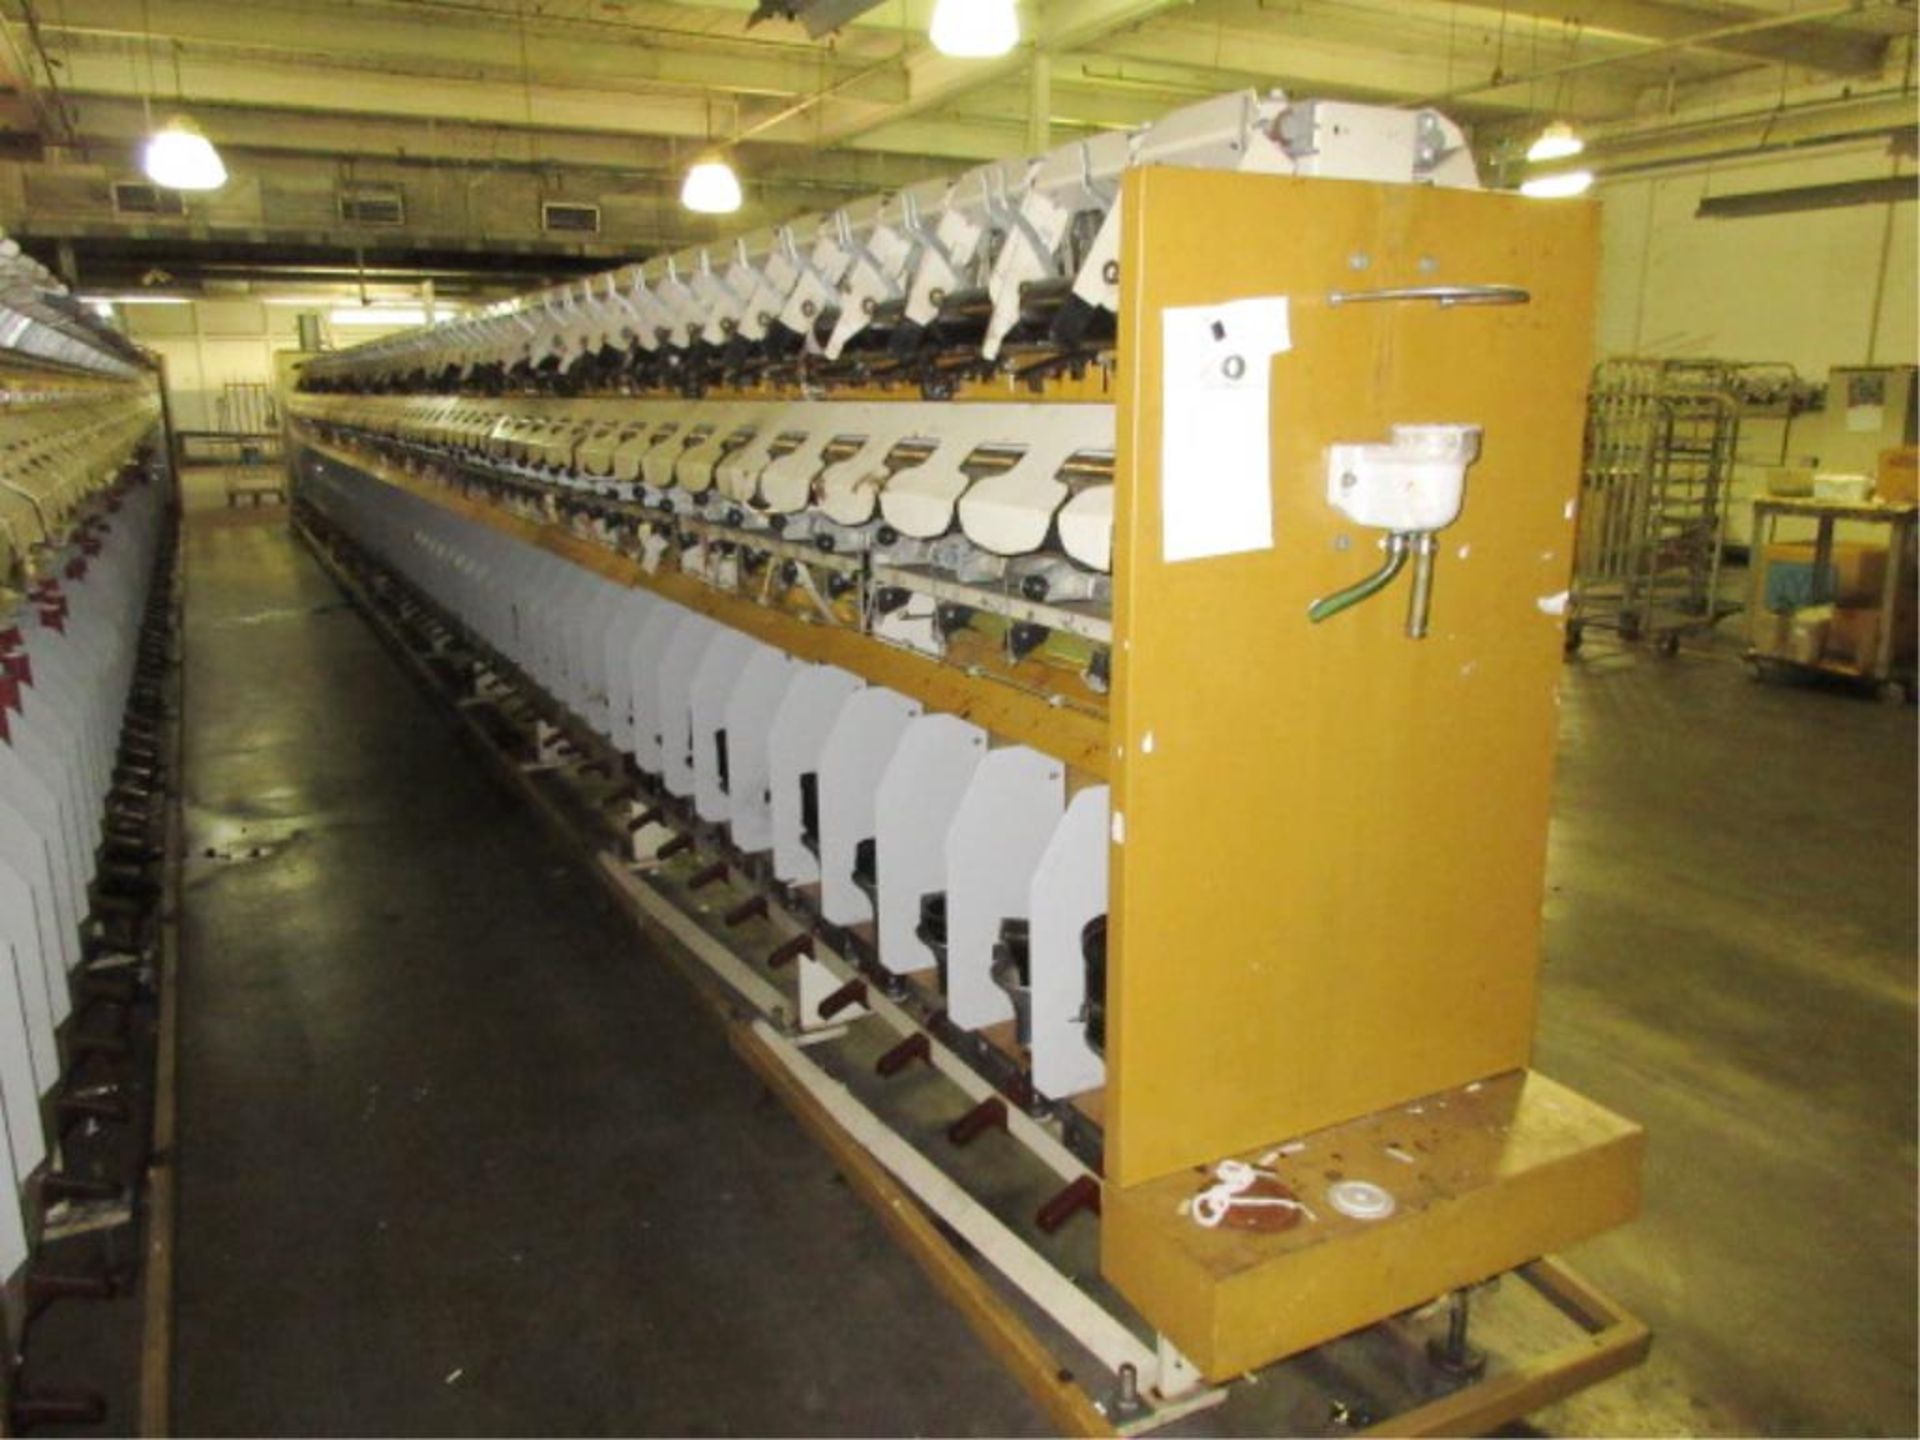 ICBT DT355 2X1 Twister, (1988), 120 spindles, parts machine, not running condition. SN# 88098-15 & - Image 6 of 8